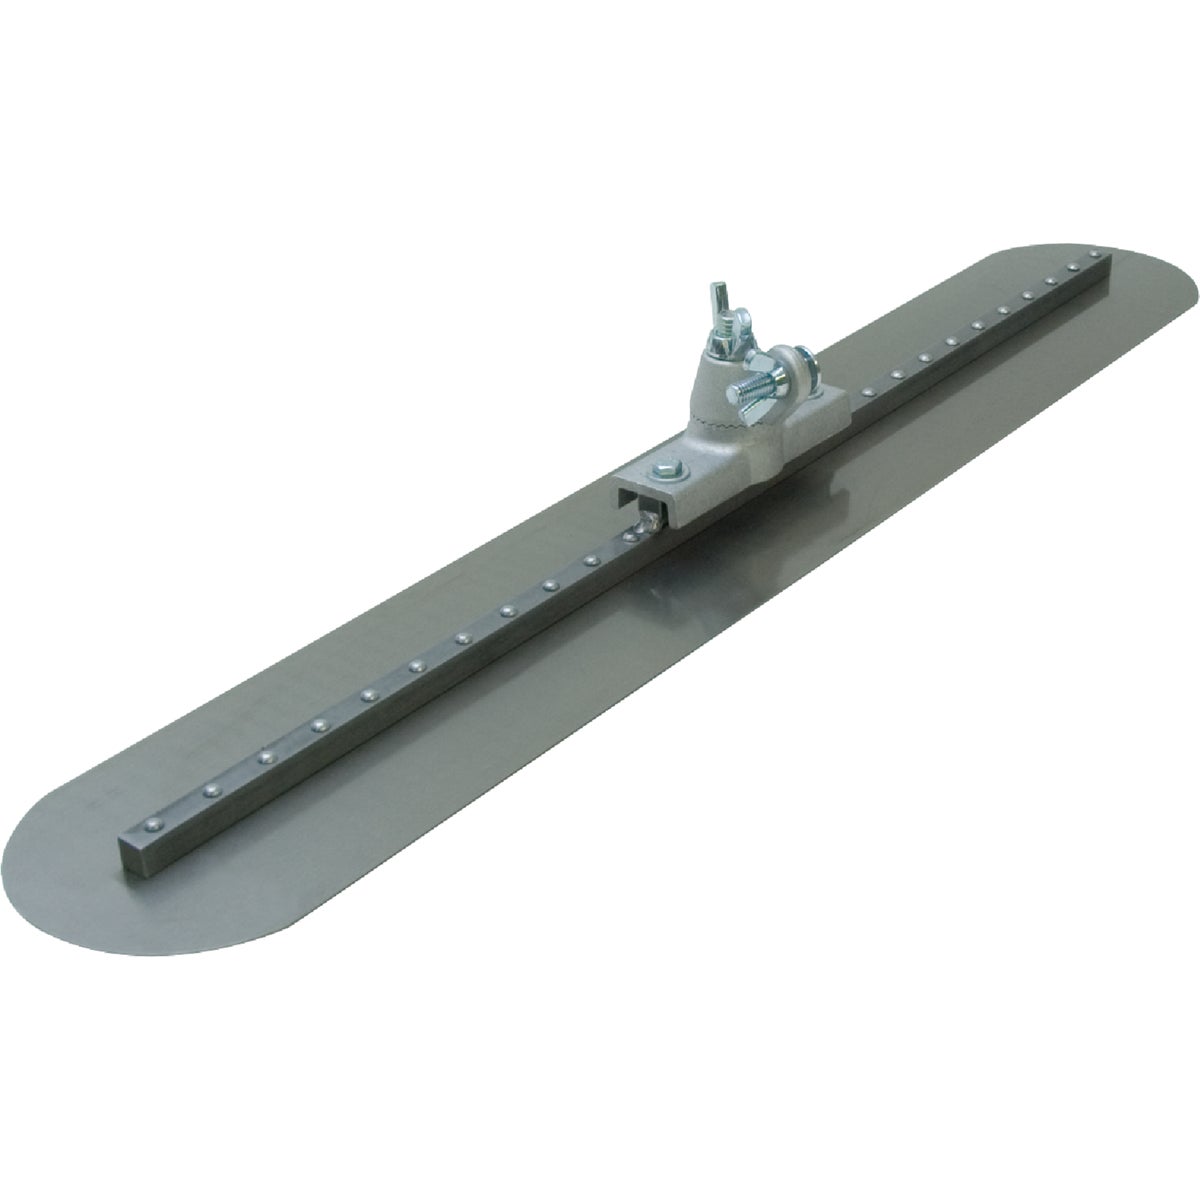 Item 349941, 36 In. x 5 In. round end carbon steel Fresno with all-angle bracket.